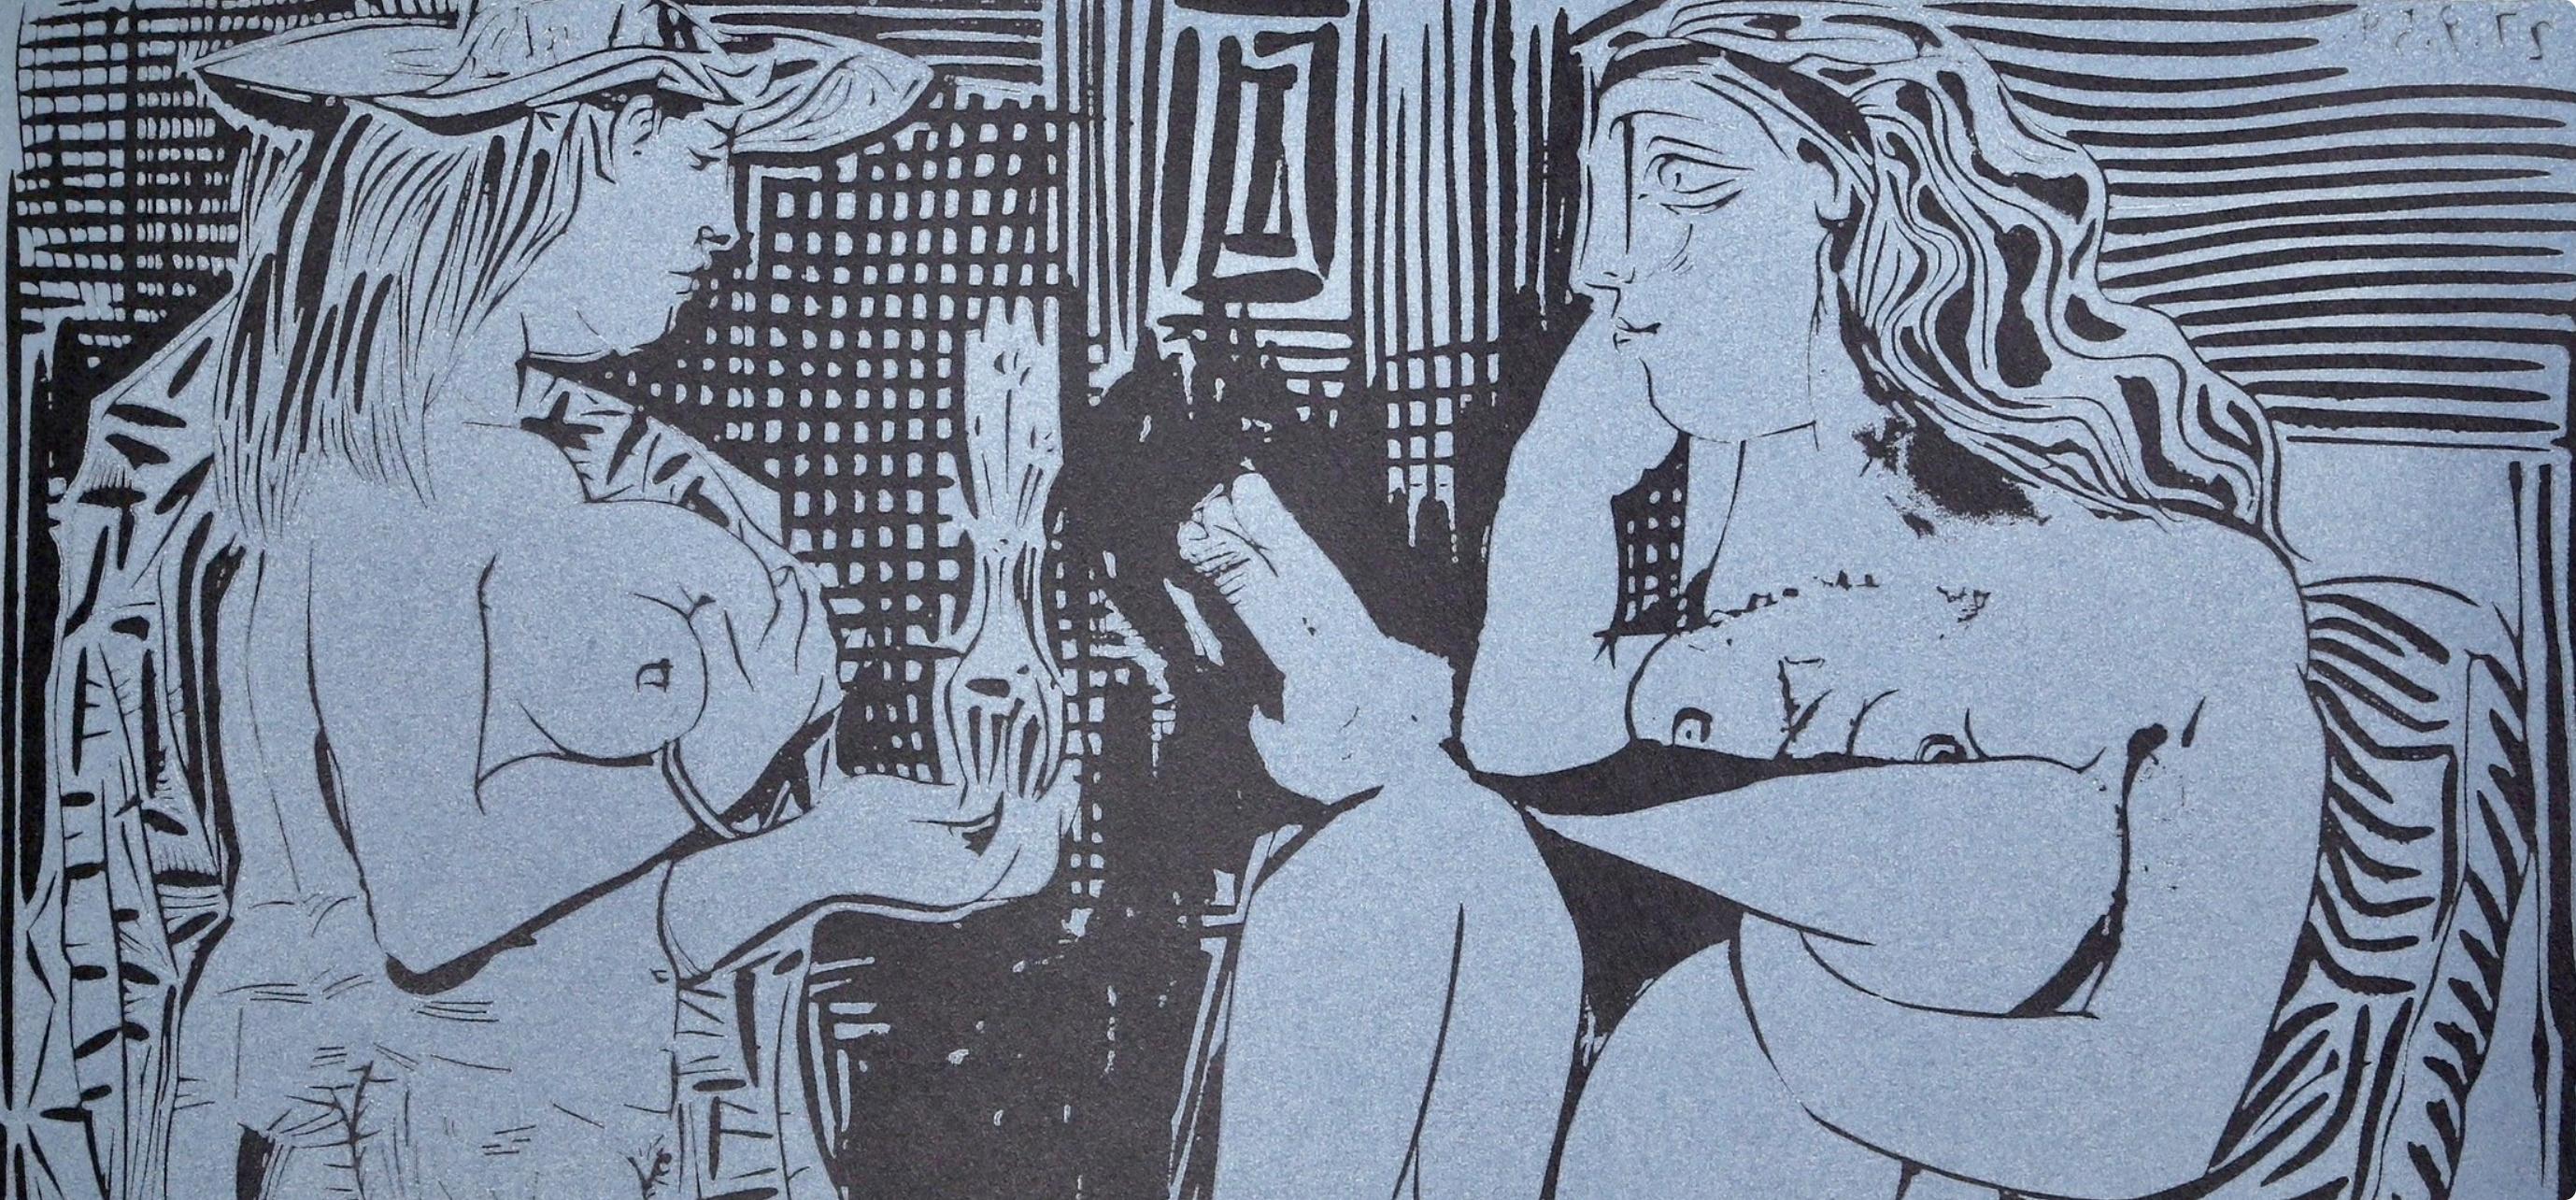 Picasso, Two Women with a Vase of Flowers, Pablo Picasso-Linogravures (after) For Sale 1